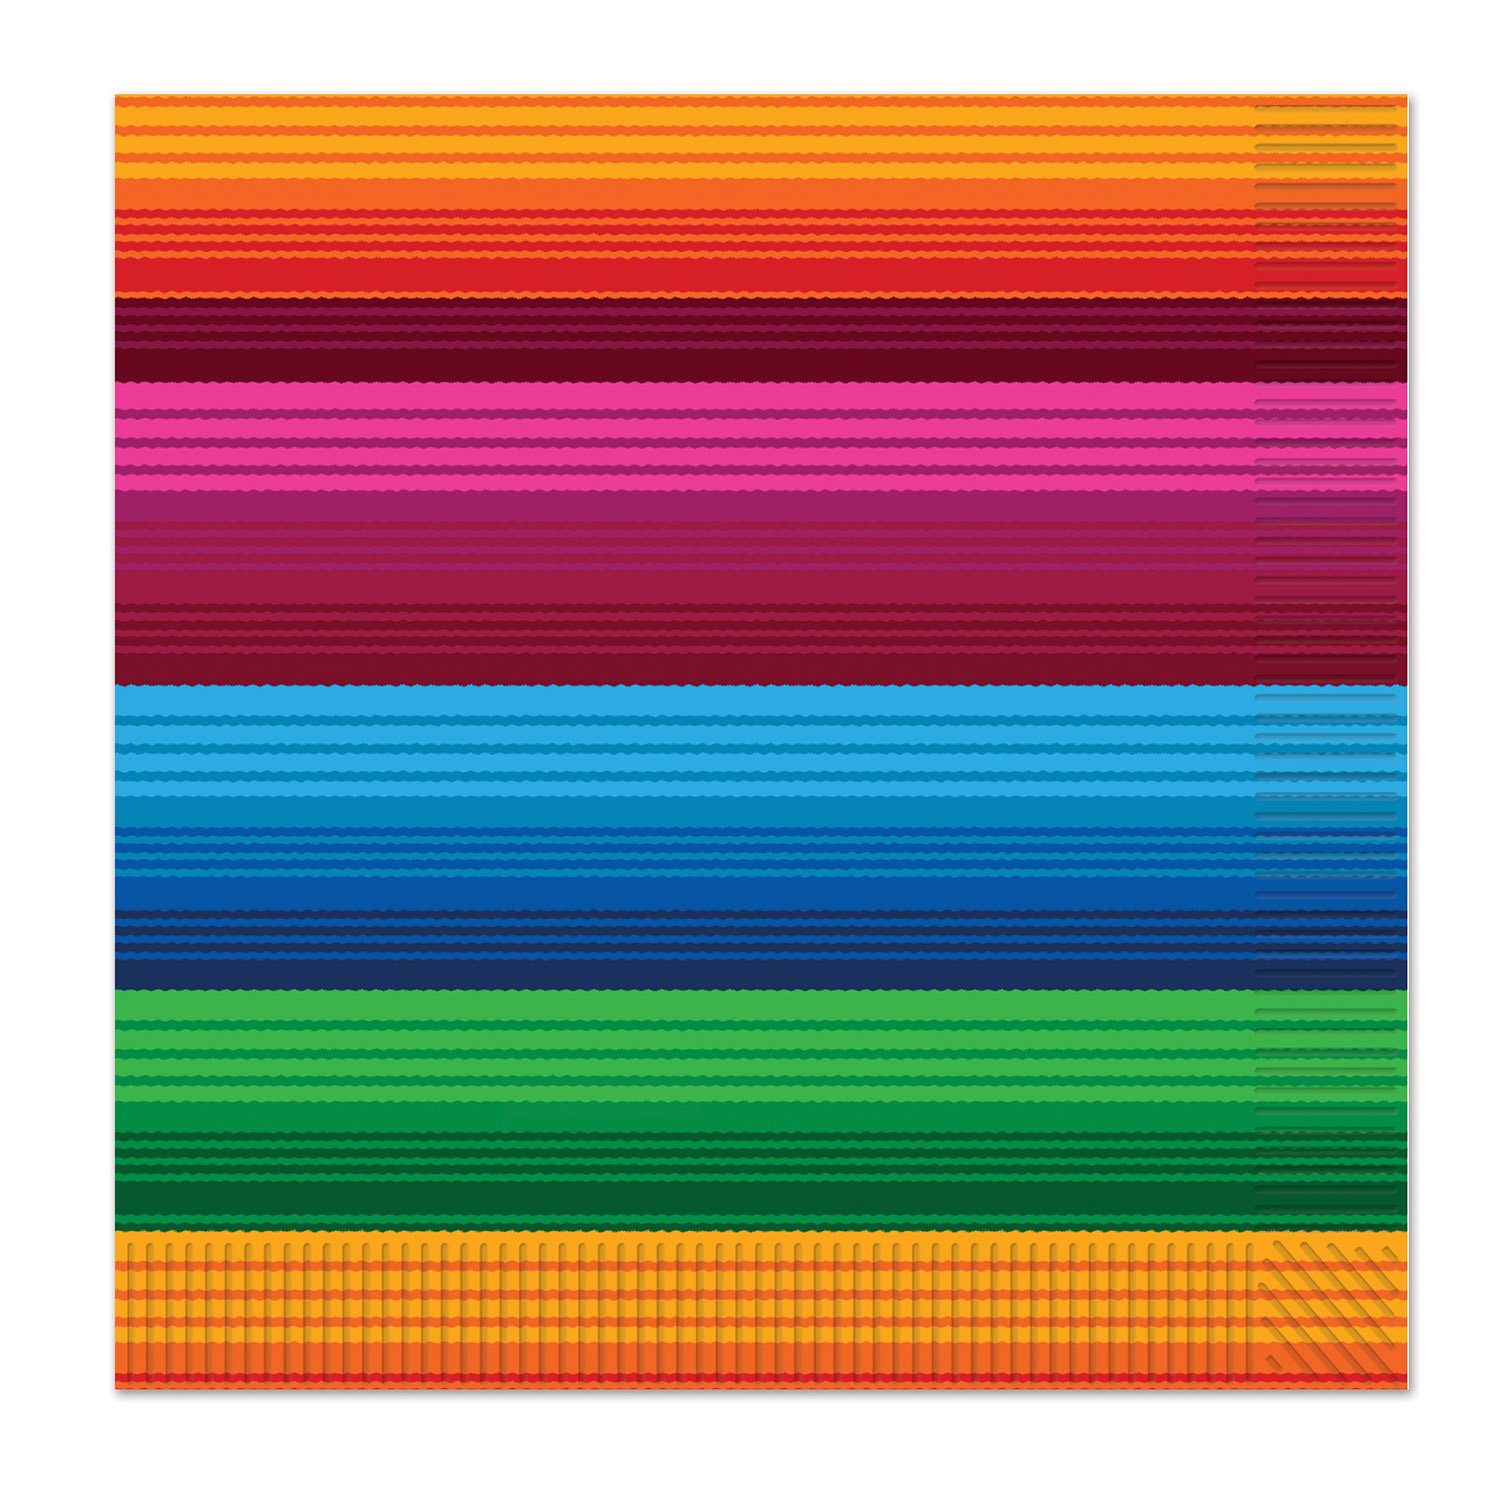 Beistle Design Luncheon 16 Piece Fiesta Paper Napkins Serape Printed Pattern for Mexican Theme Parties, Taco Night and Cinco De Mayo Festivities, standard, Multicolored